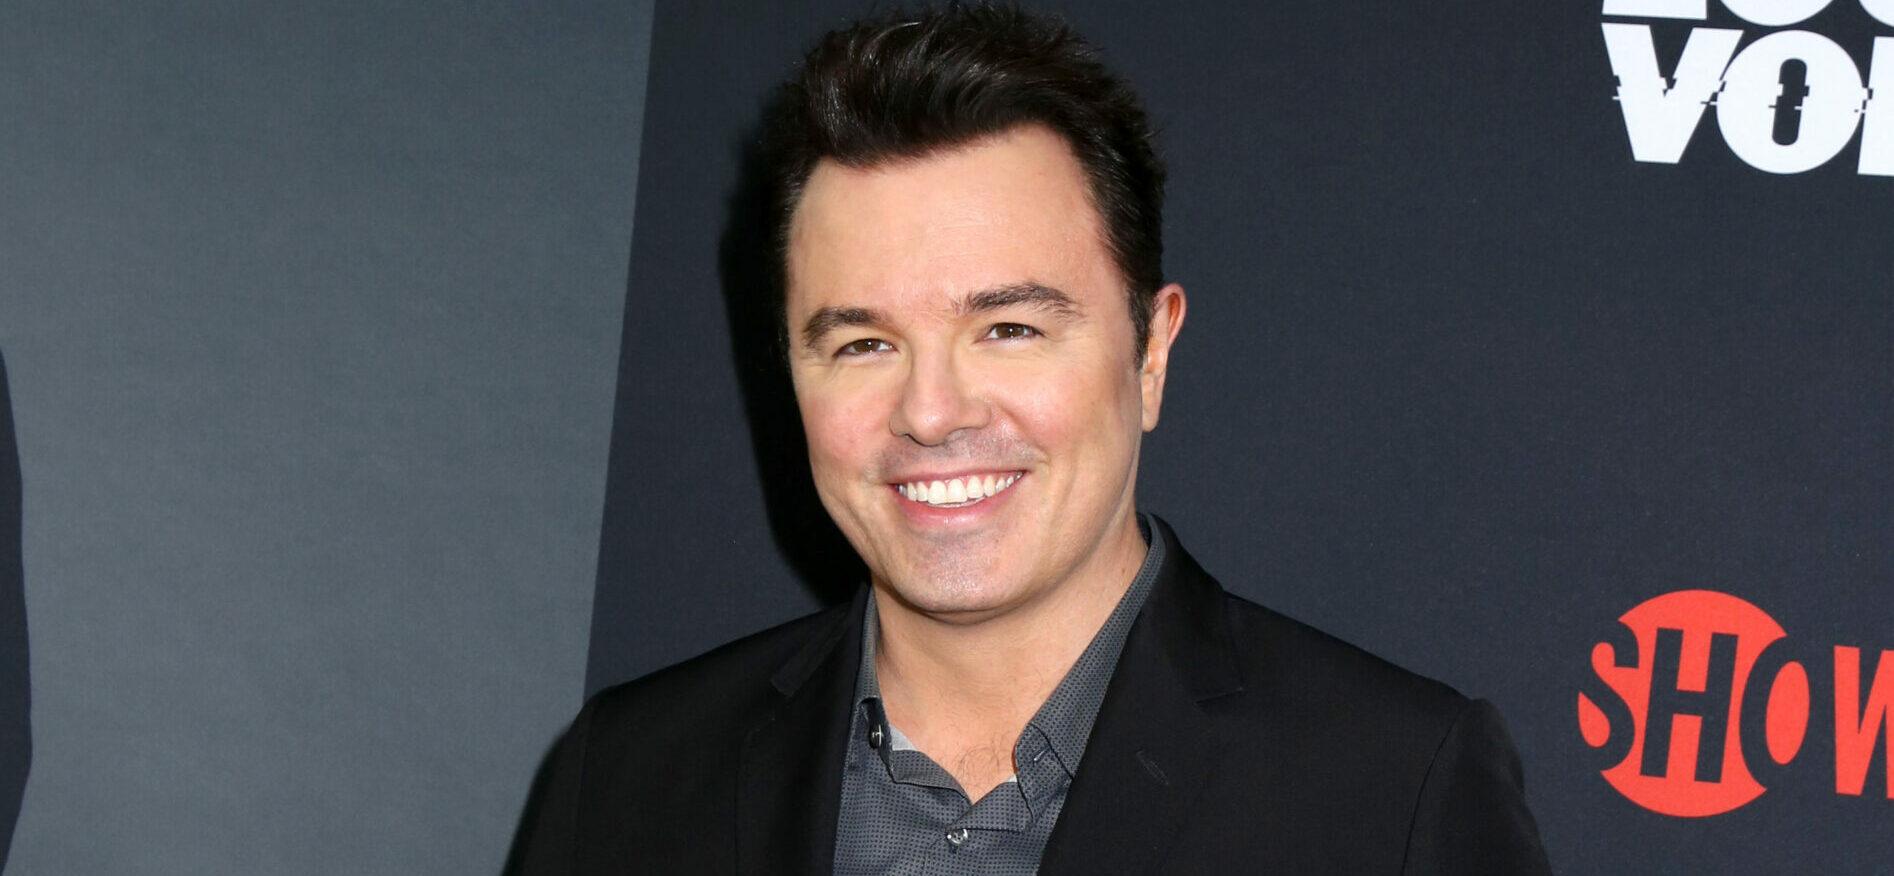 'The Loudest Voice' Premiere held at The Paris Theatre on June 24, 2019 in New York City, NY ©Steven Bergman/AFF-USA.COM. 24 Jun 2019 Pictured: Seth MacFarlane.